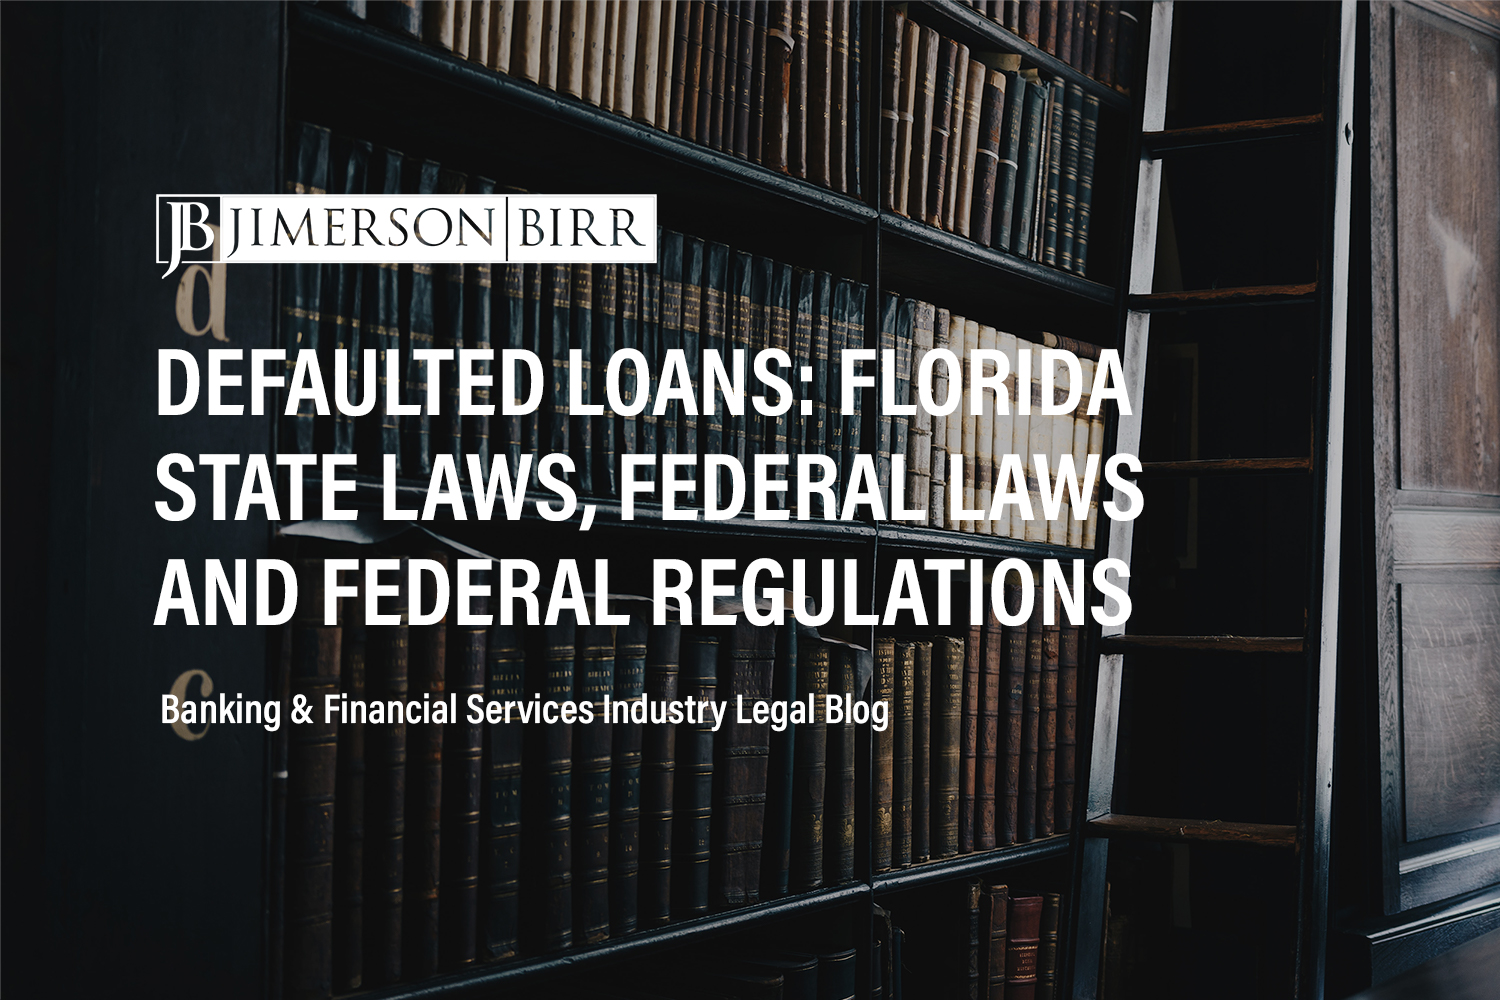 Defaulted Loans: Florida State Laws, Federal Laws and Federal Regulations